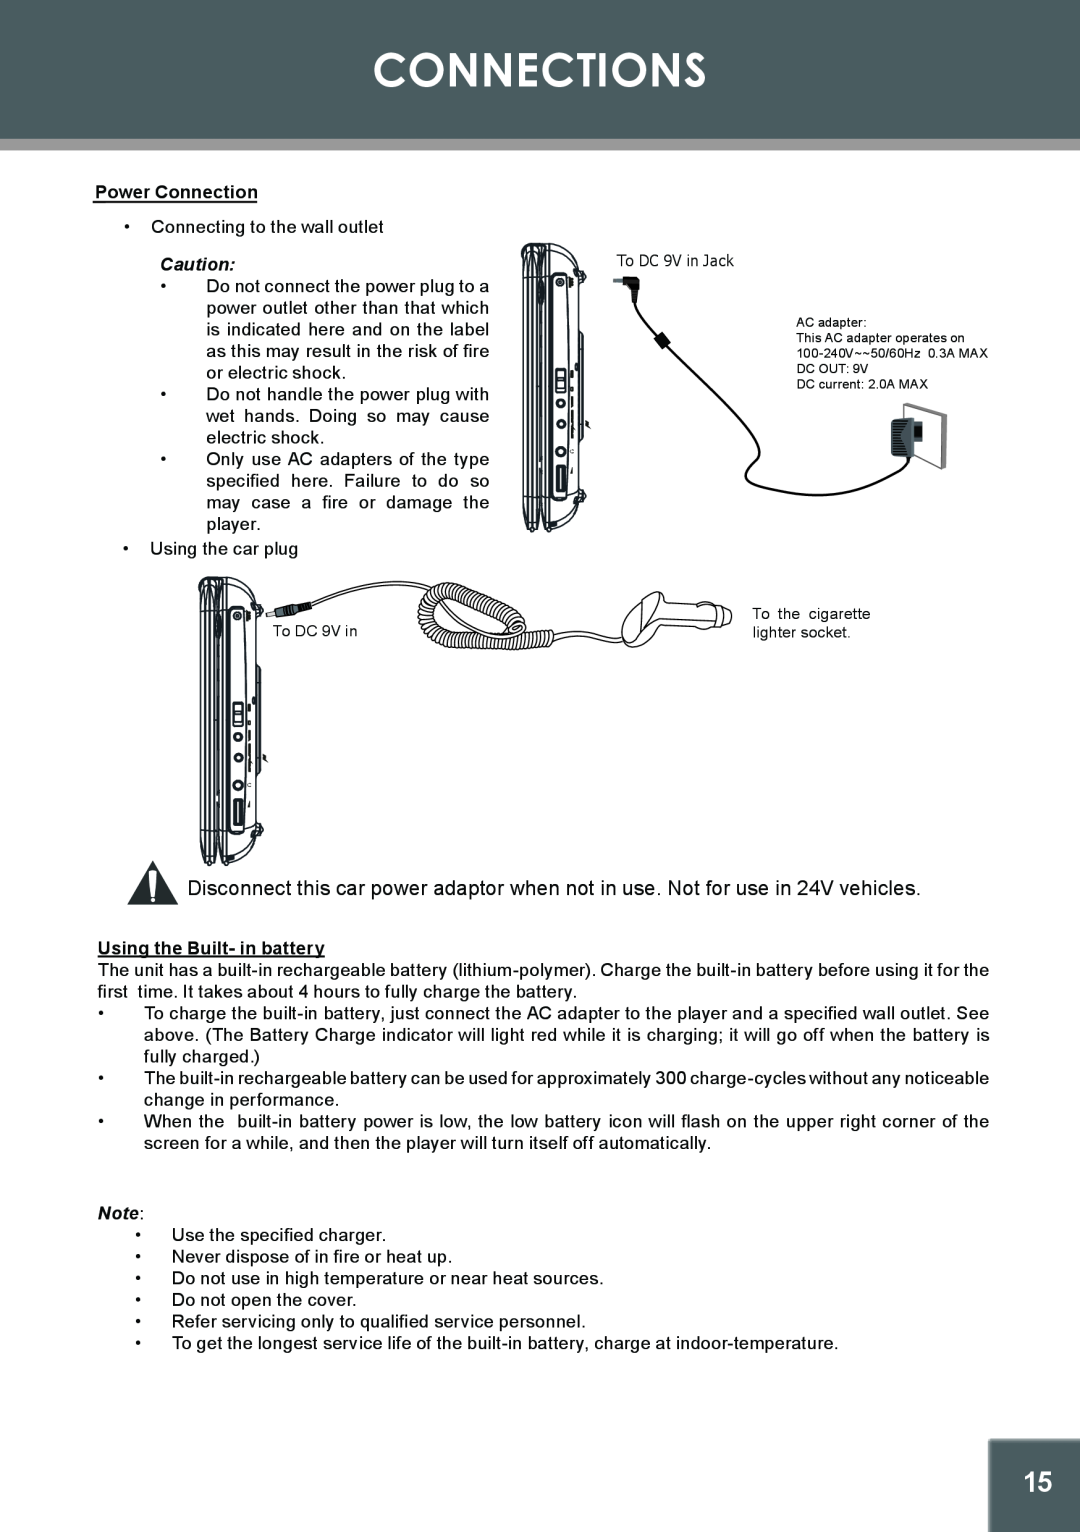 COBY electronic 907-FD10-29S1-00R, TFDVD1029 instruction manual Connections, Power Connection, Using the Built- in battery 